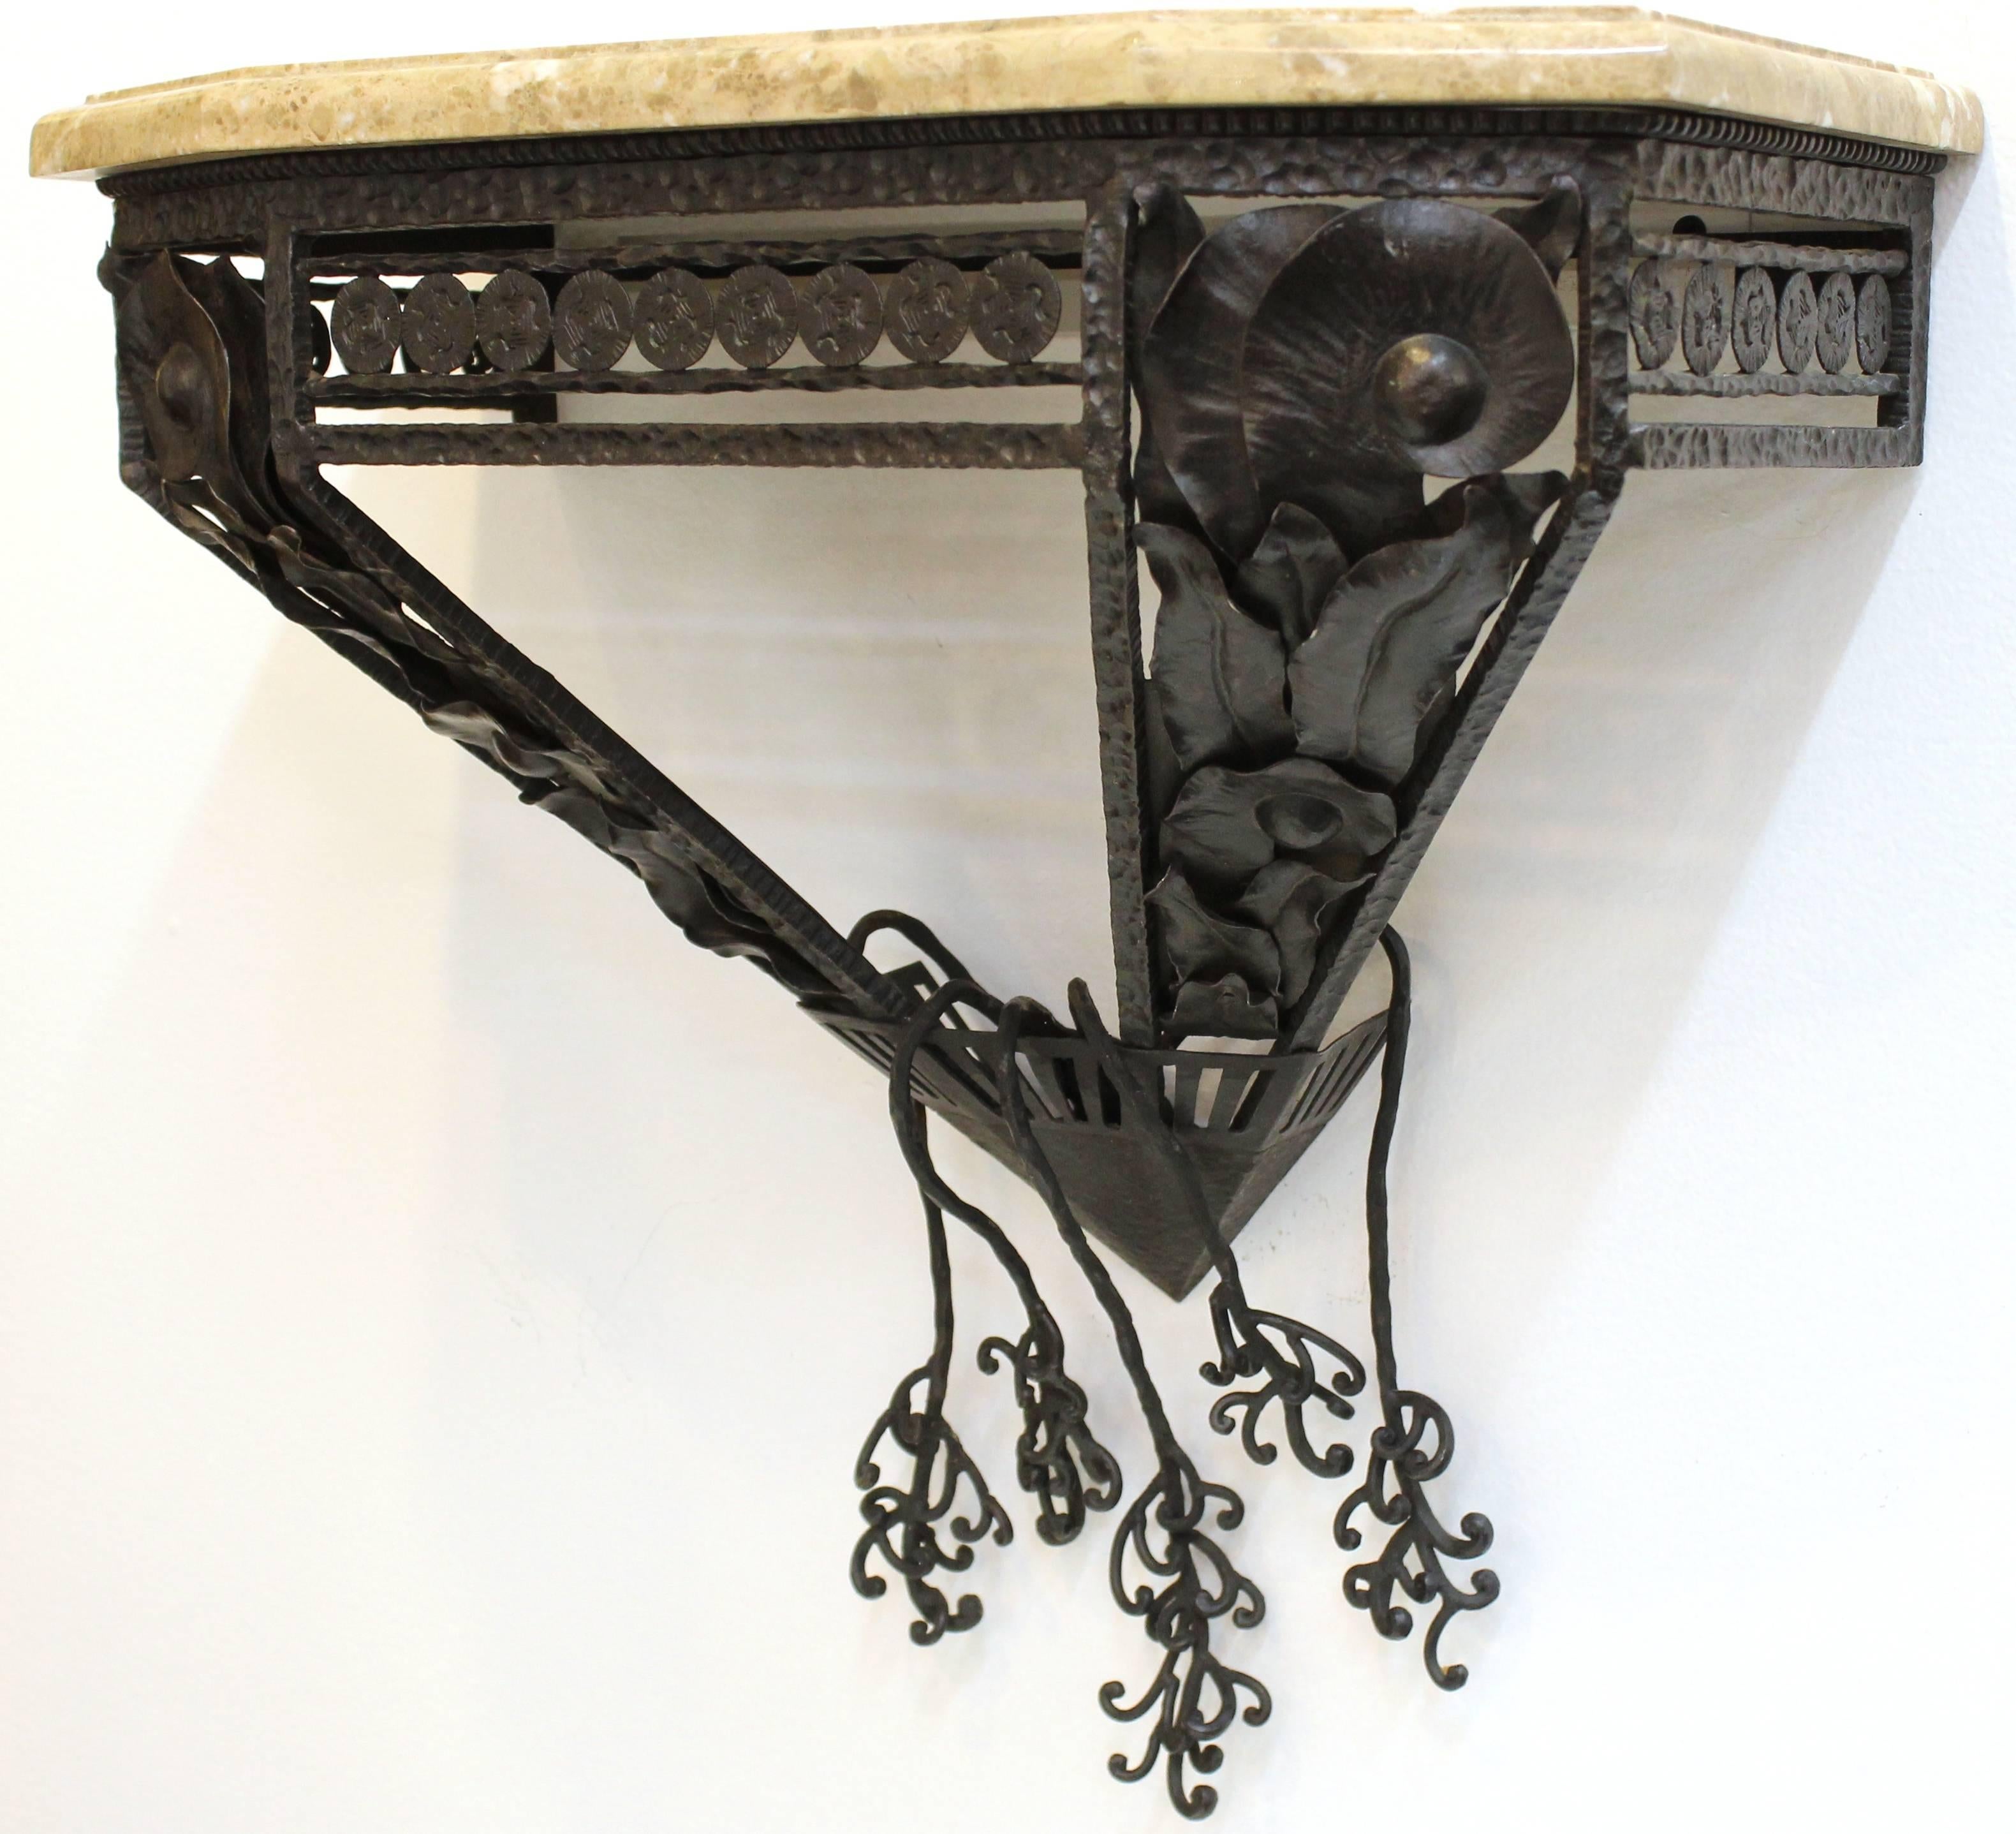 Art-Deco inspired console in the style of Oscar Bach in wrought iron and marble top. The edges of the marble are beveled and the wrought iron features abstracted organic forms. The wall-mounted console is in excellent condition. 110533.